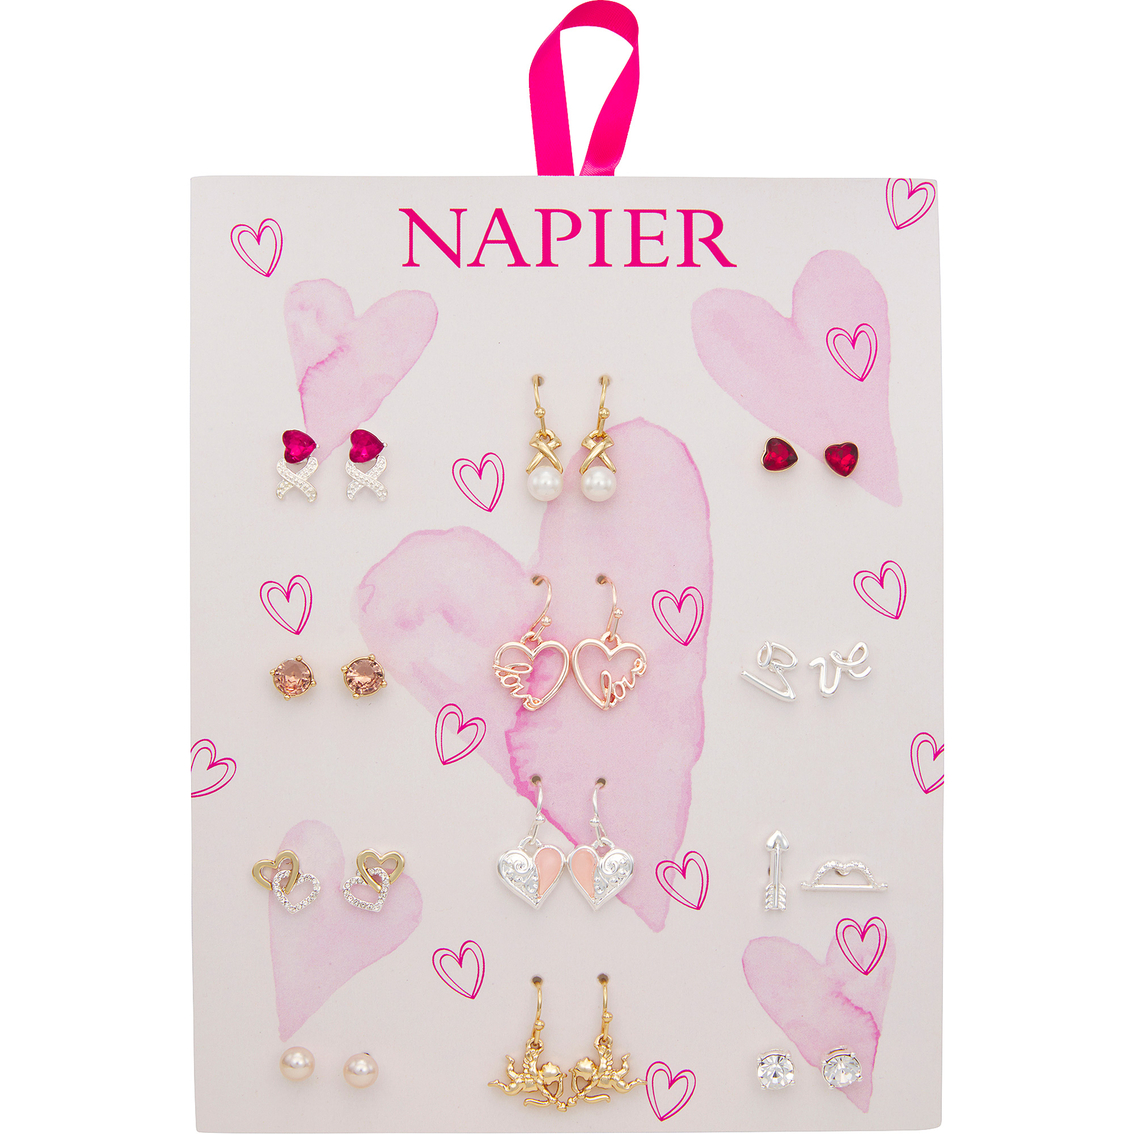 Napier Two Tone Valentine's Earrings 12 pk. - Image 2 of 3